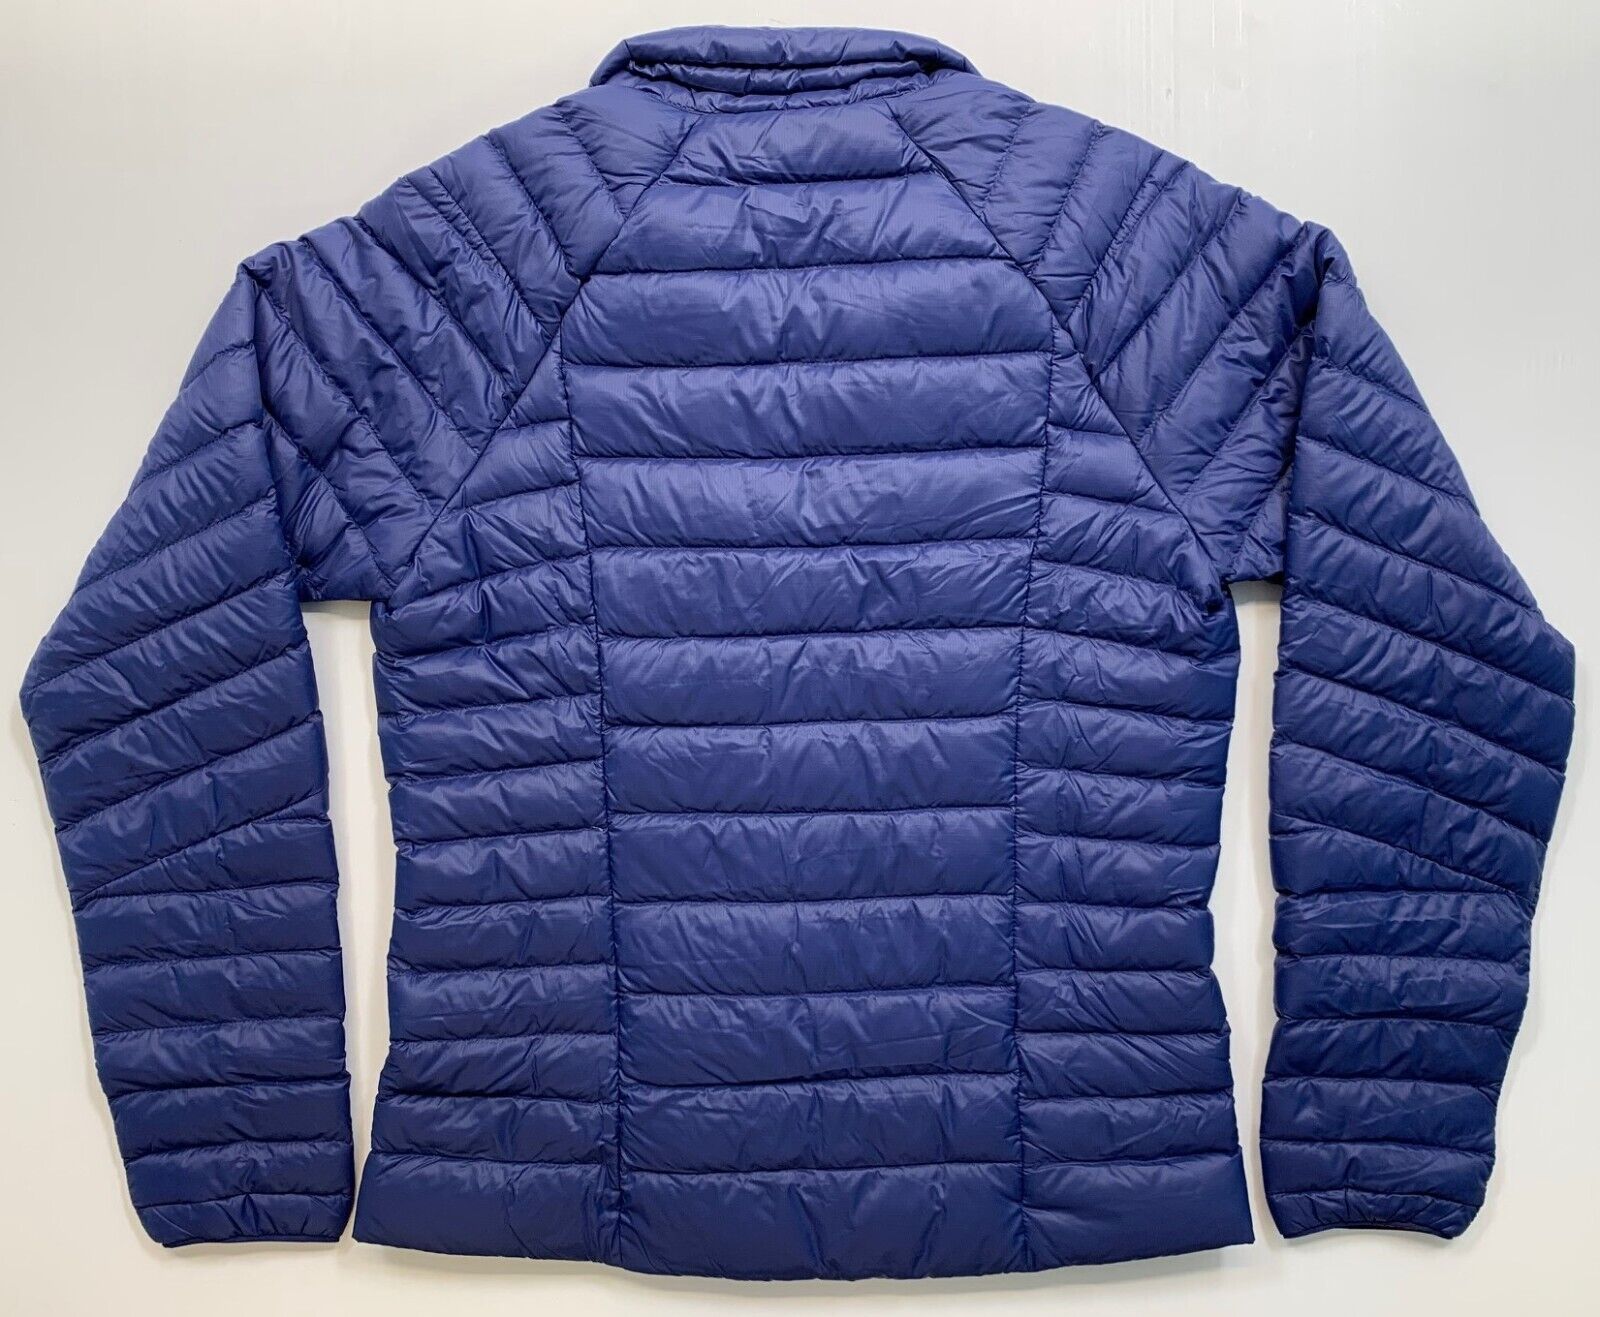 Women's PATAGONIA Down Sweater Insulated Jacket #84684 SOUND BLUE (SNDB ...